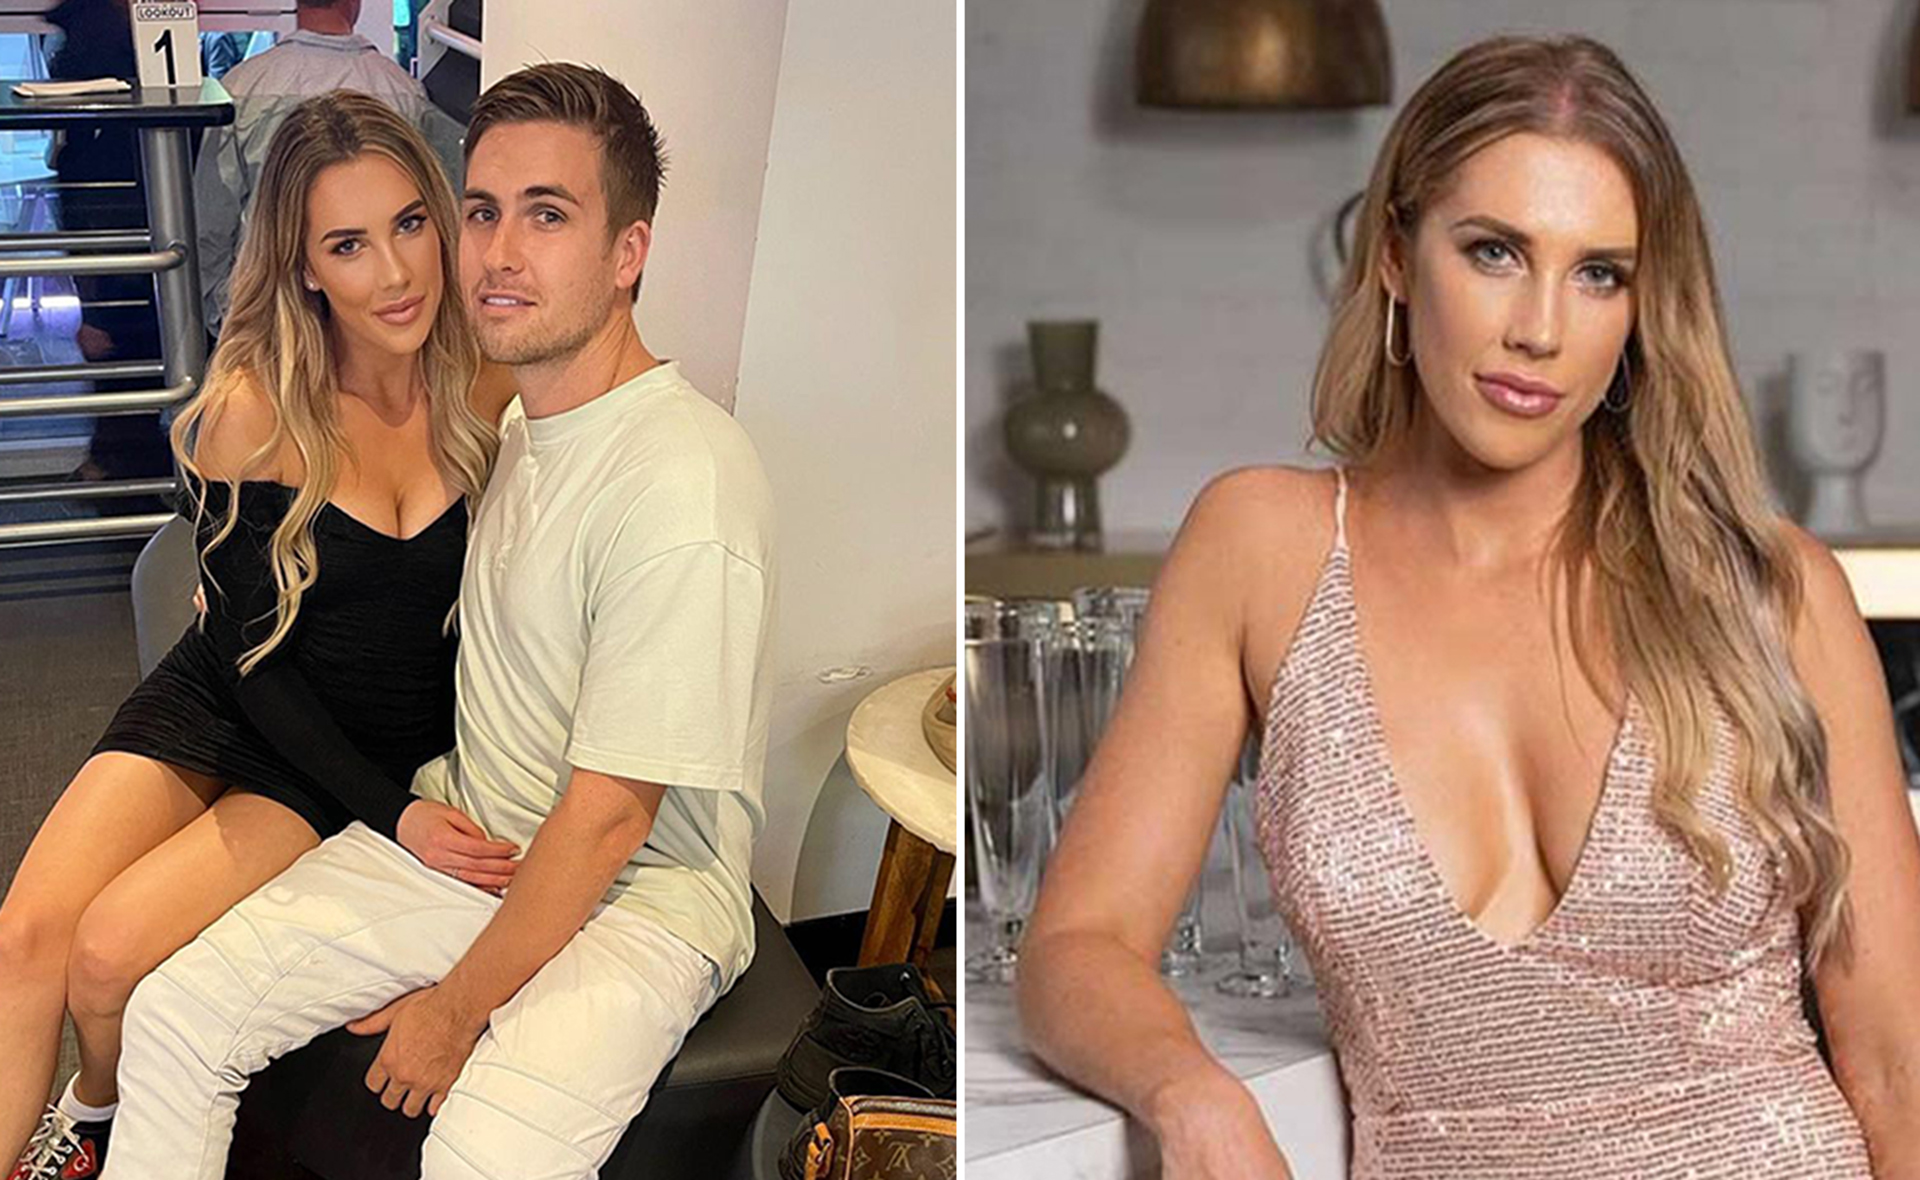 MAFS star Beck Zemek announces she’s pregnant with boyfriend Ben Michell: “This is such a miracle for us”